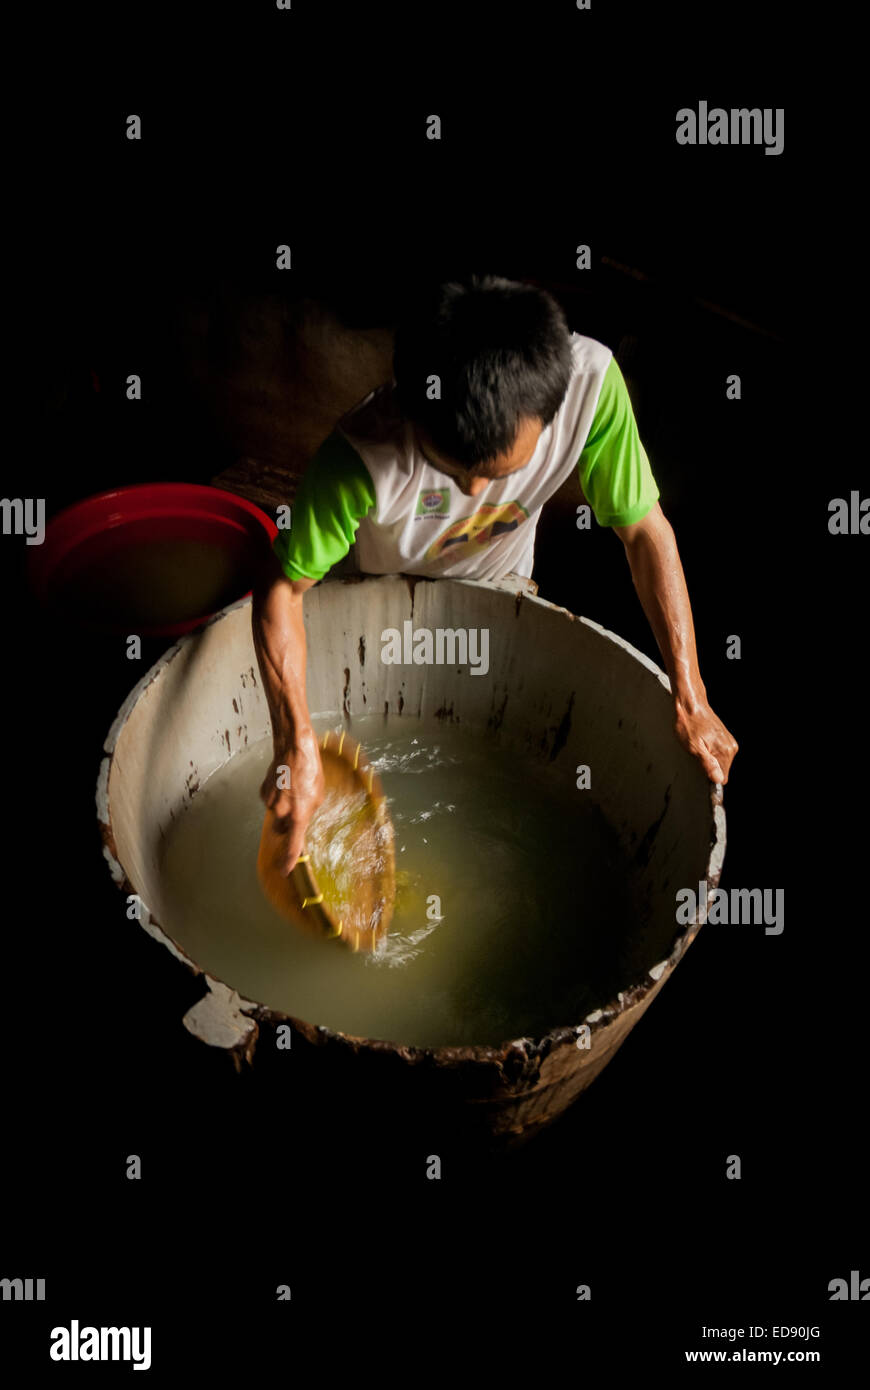 A worker stirring up water in a wooden barrel in which mung beans are submerged at a home industry of bean sprouts production in Jakarta, Indonesia. Stock Photo